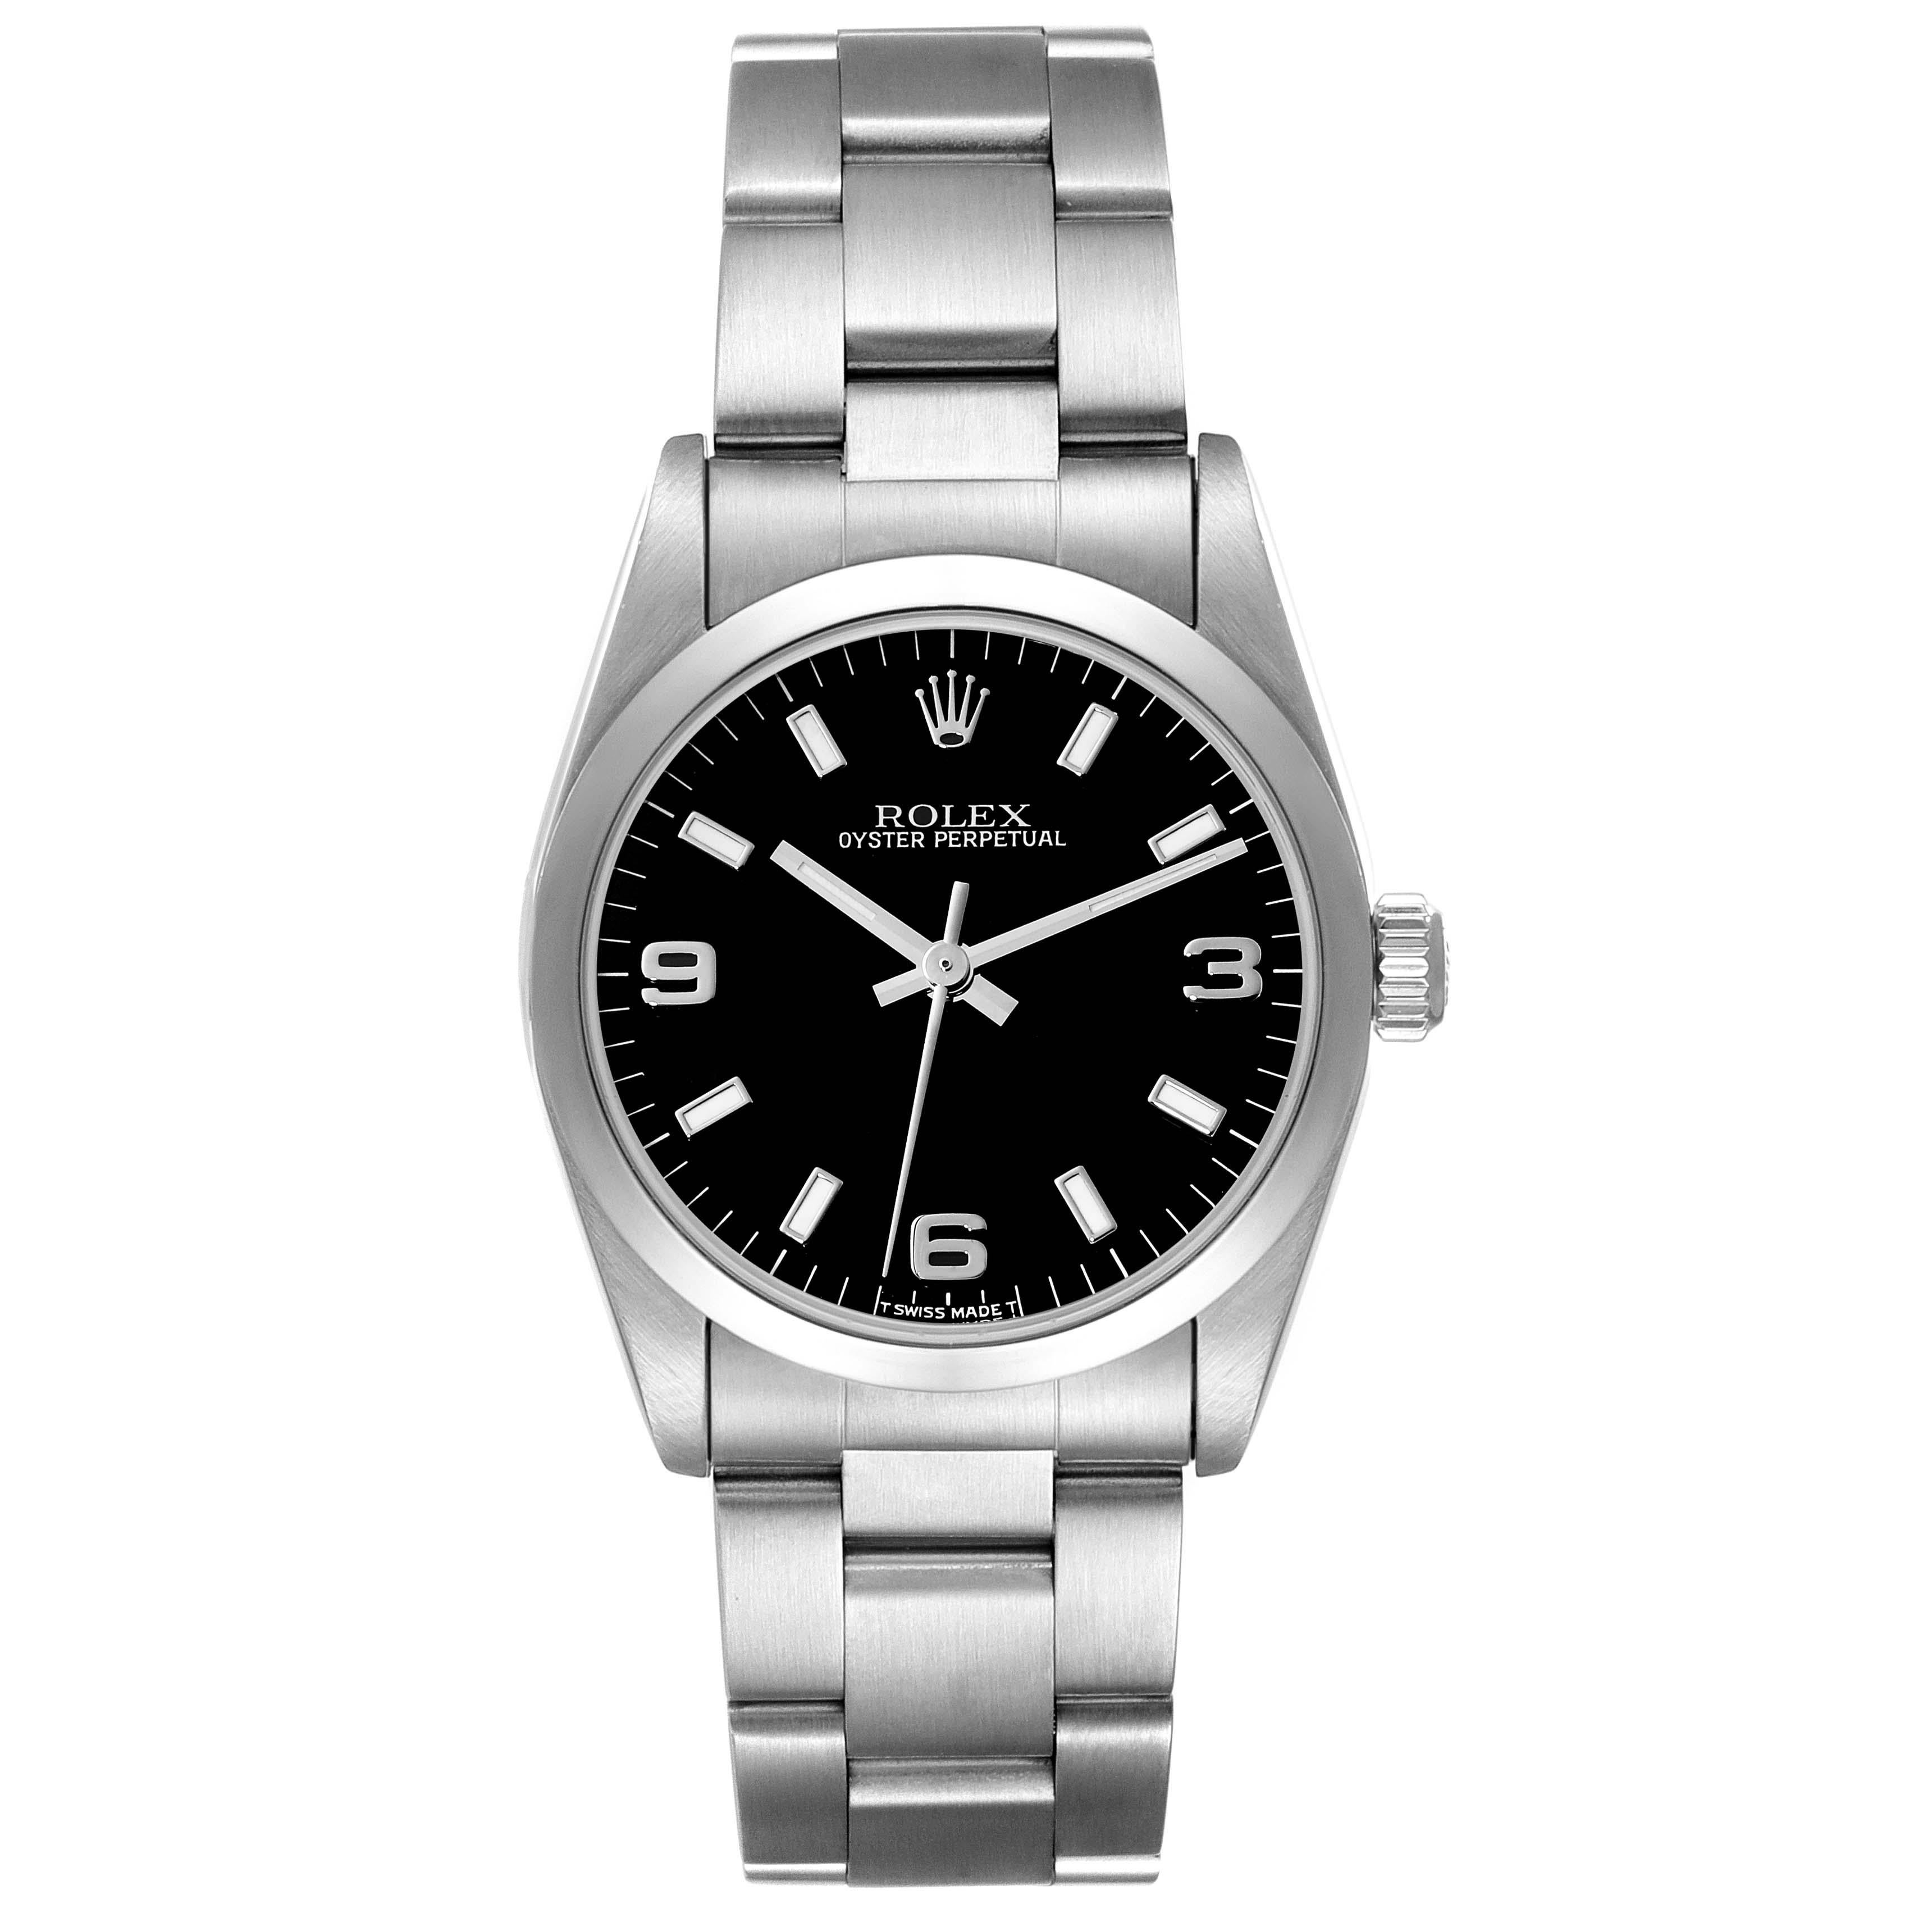 Rolex Midsize 31mm Black Dial Automatic Steel Ladies Watch 67480. Automatic self-winding movement. Stainless steel oyster case 31.0 mm in diameter. Rolex logo on a crown. Stainless steel smooth bezel. Scratch resistant sapphire crystal. Black dial